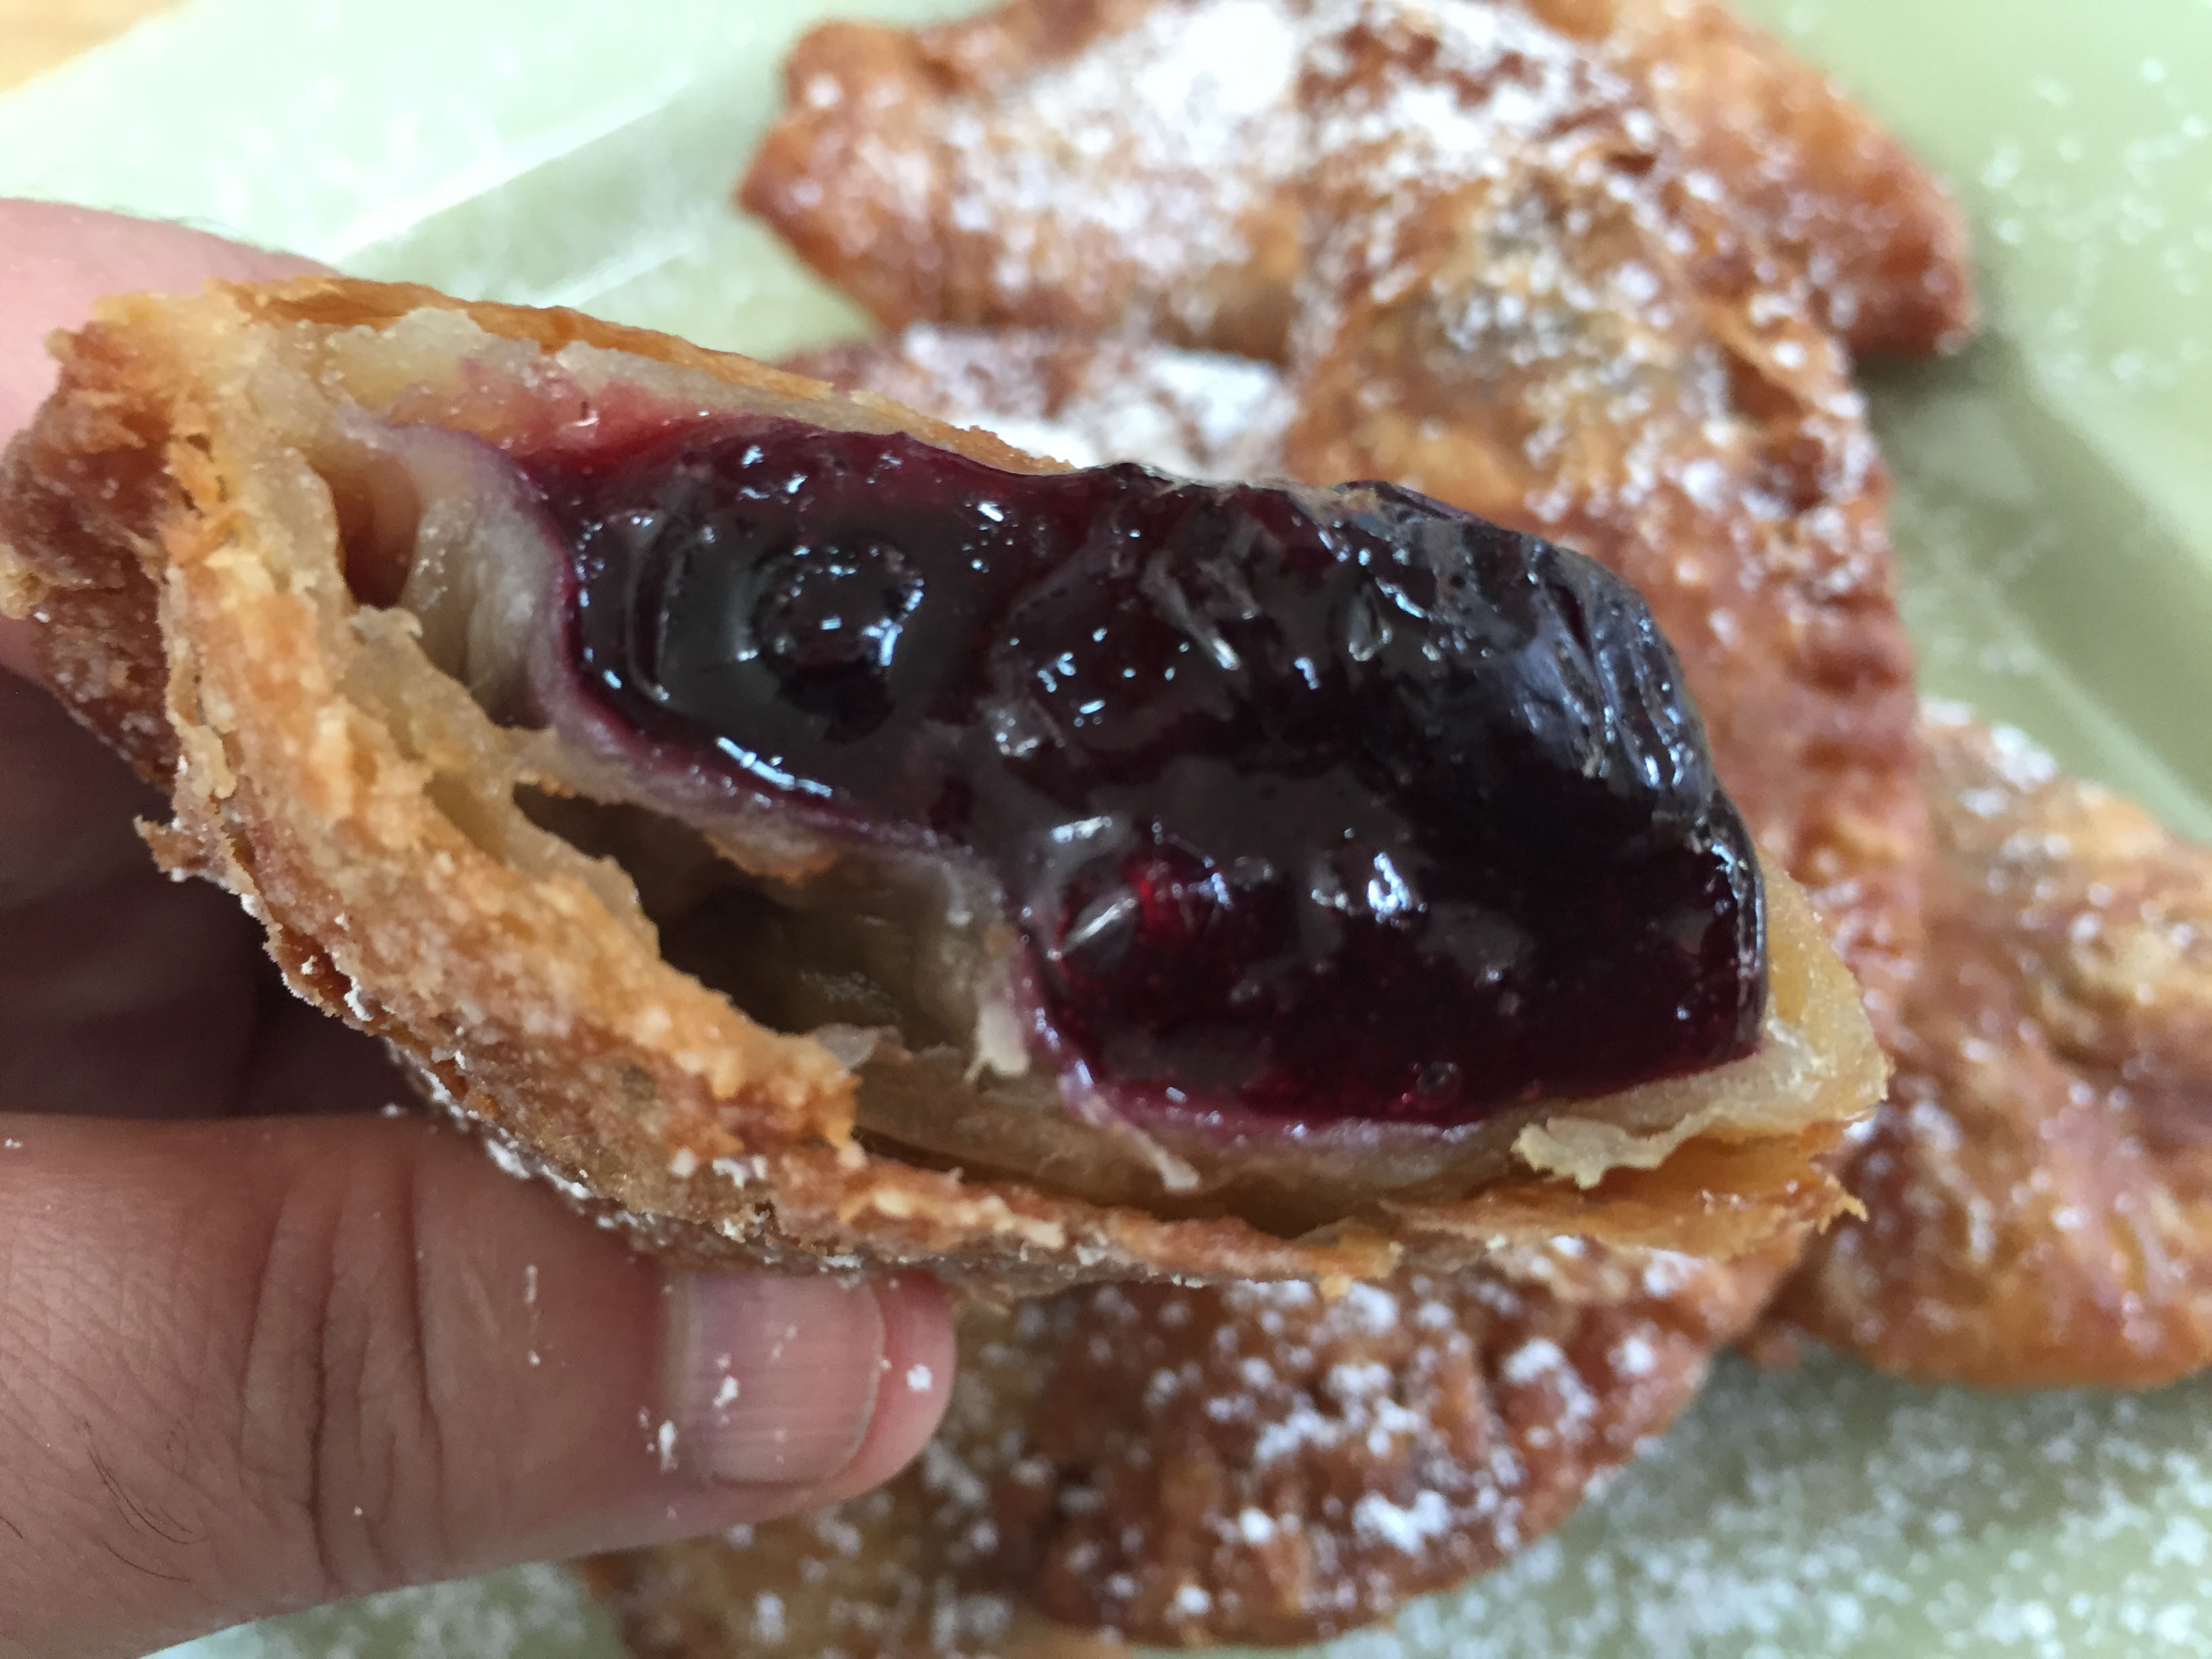 Fried blueberry pies